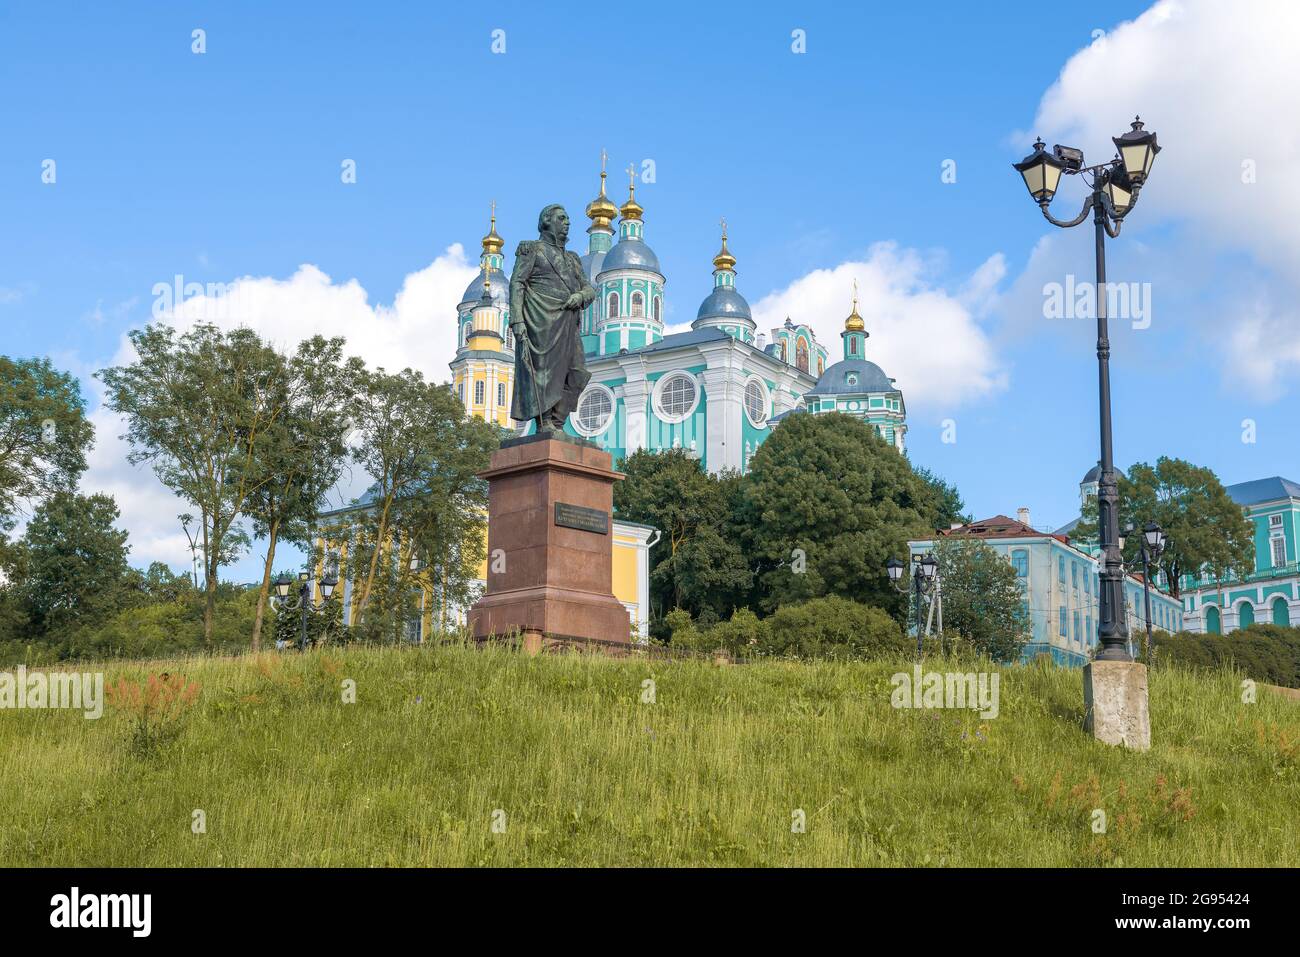 SMOLENSK, RUSSIA - JULY 04, 2021: A view of the monument to the Russian commander, Field Marshal Kutuzov M.I. July on a afternoon Stock Photo